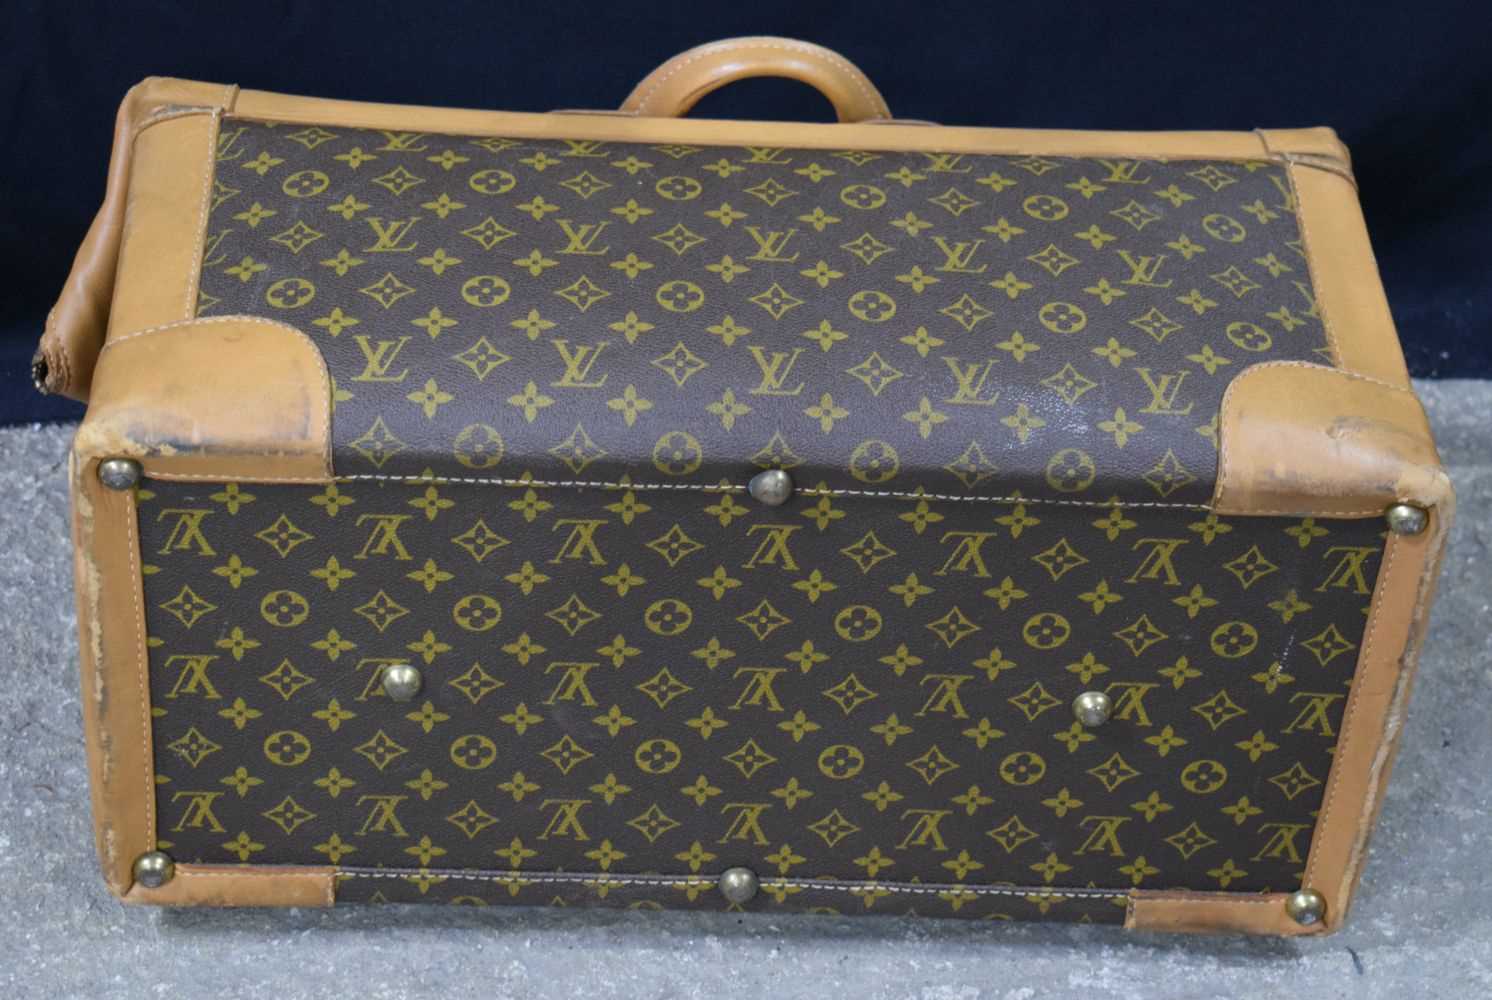 A Louis Vuitton Holdall 32 x 60 x 27 cm - Image 5 of 12